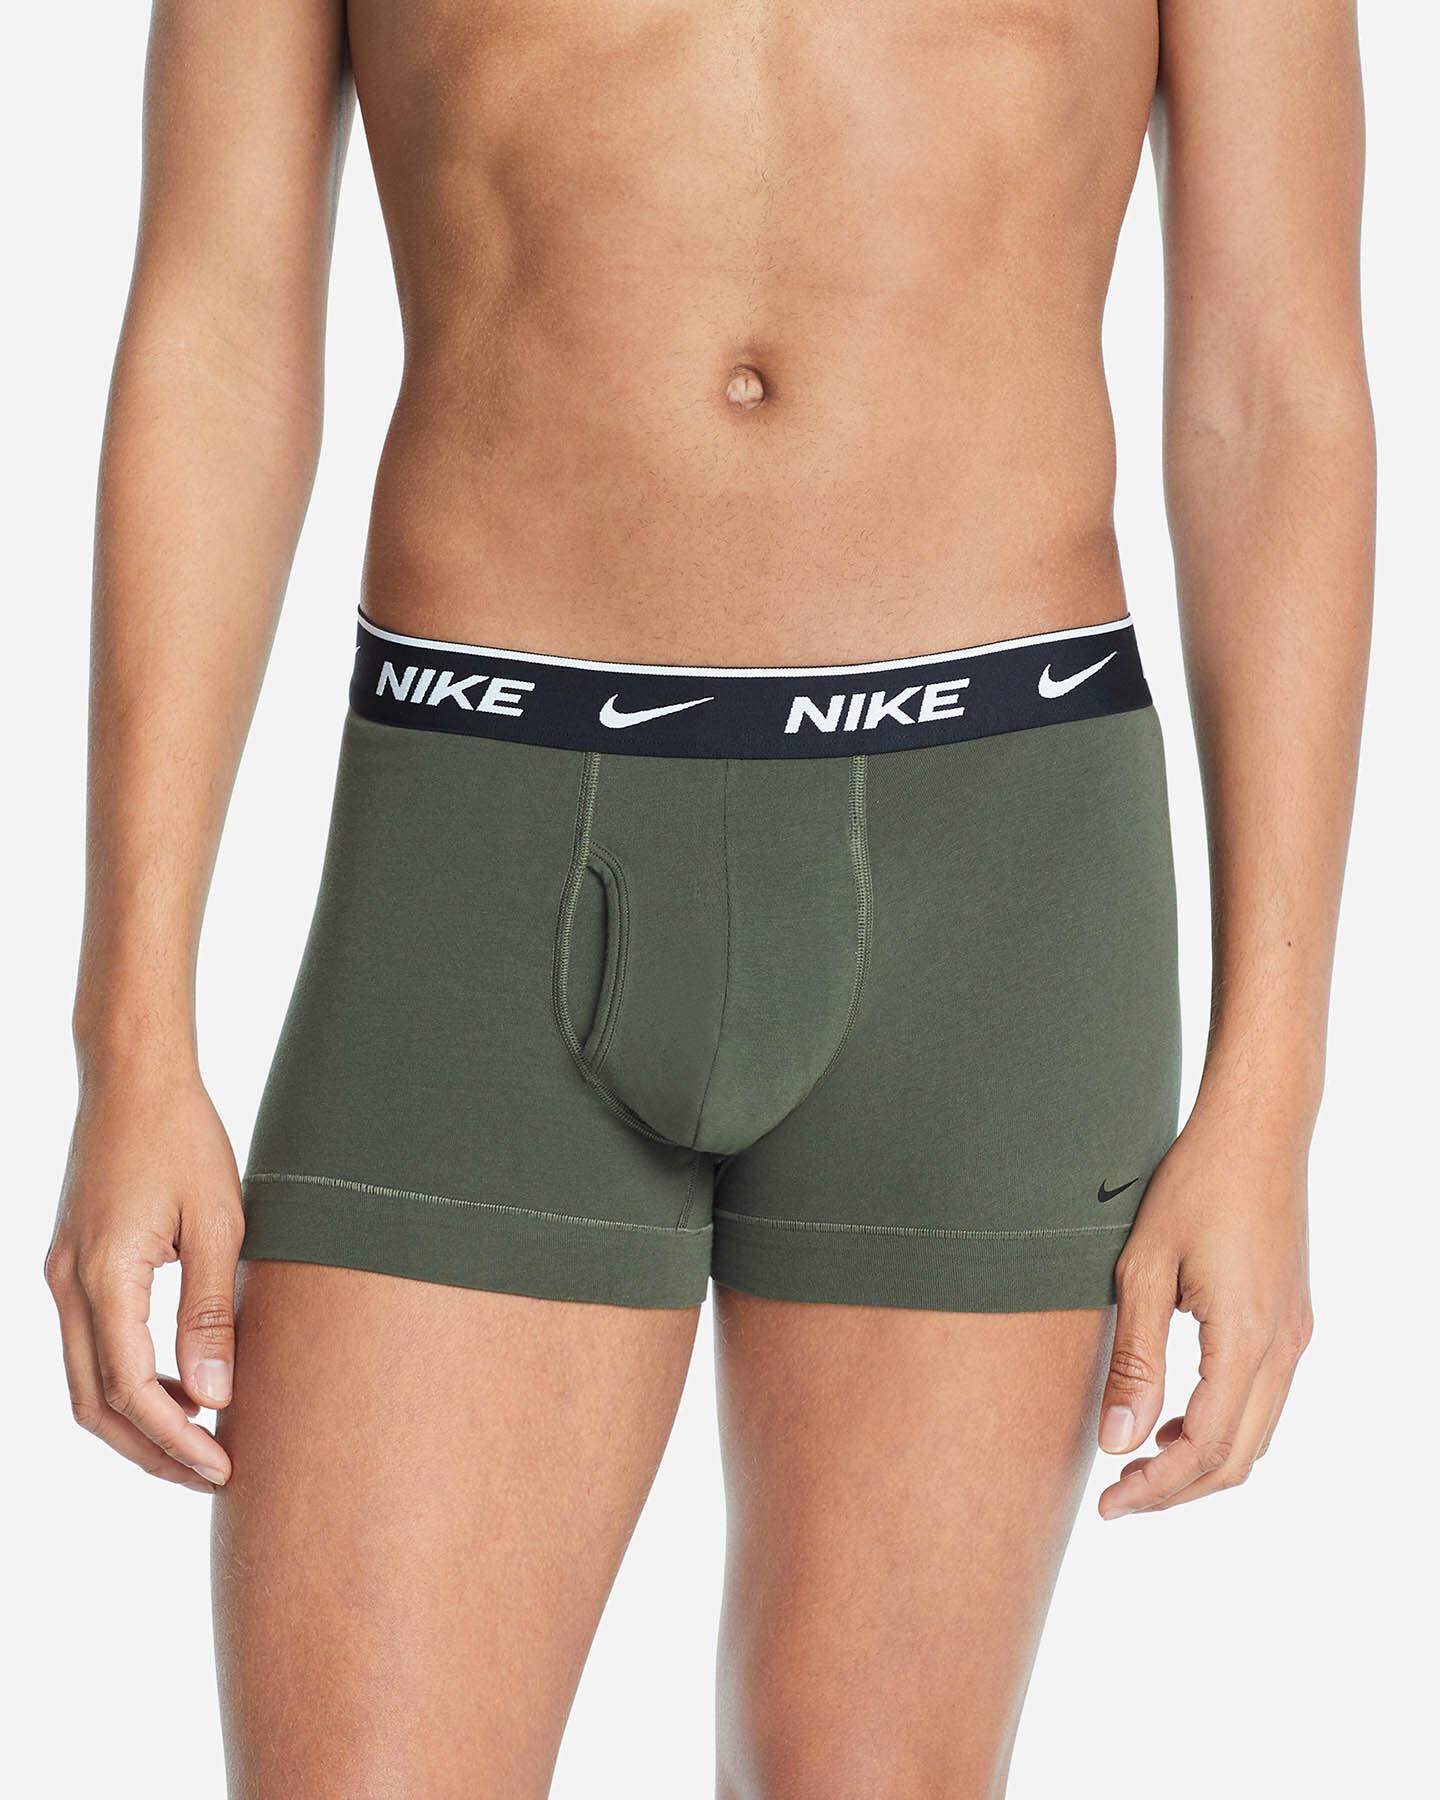  Intimo NIKE 2PACK BOXER EVERYDAY M S4099898|KUY|XL scatto 1